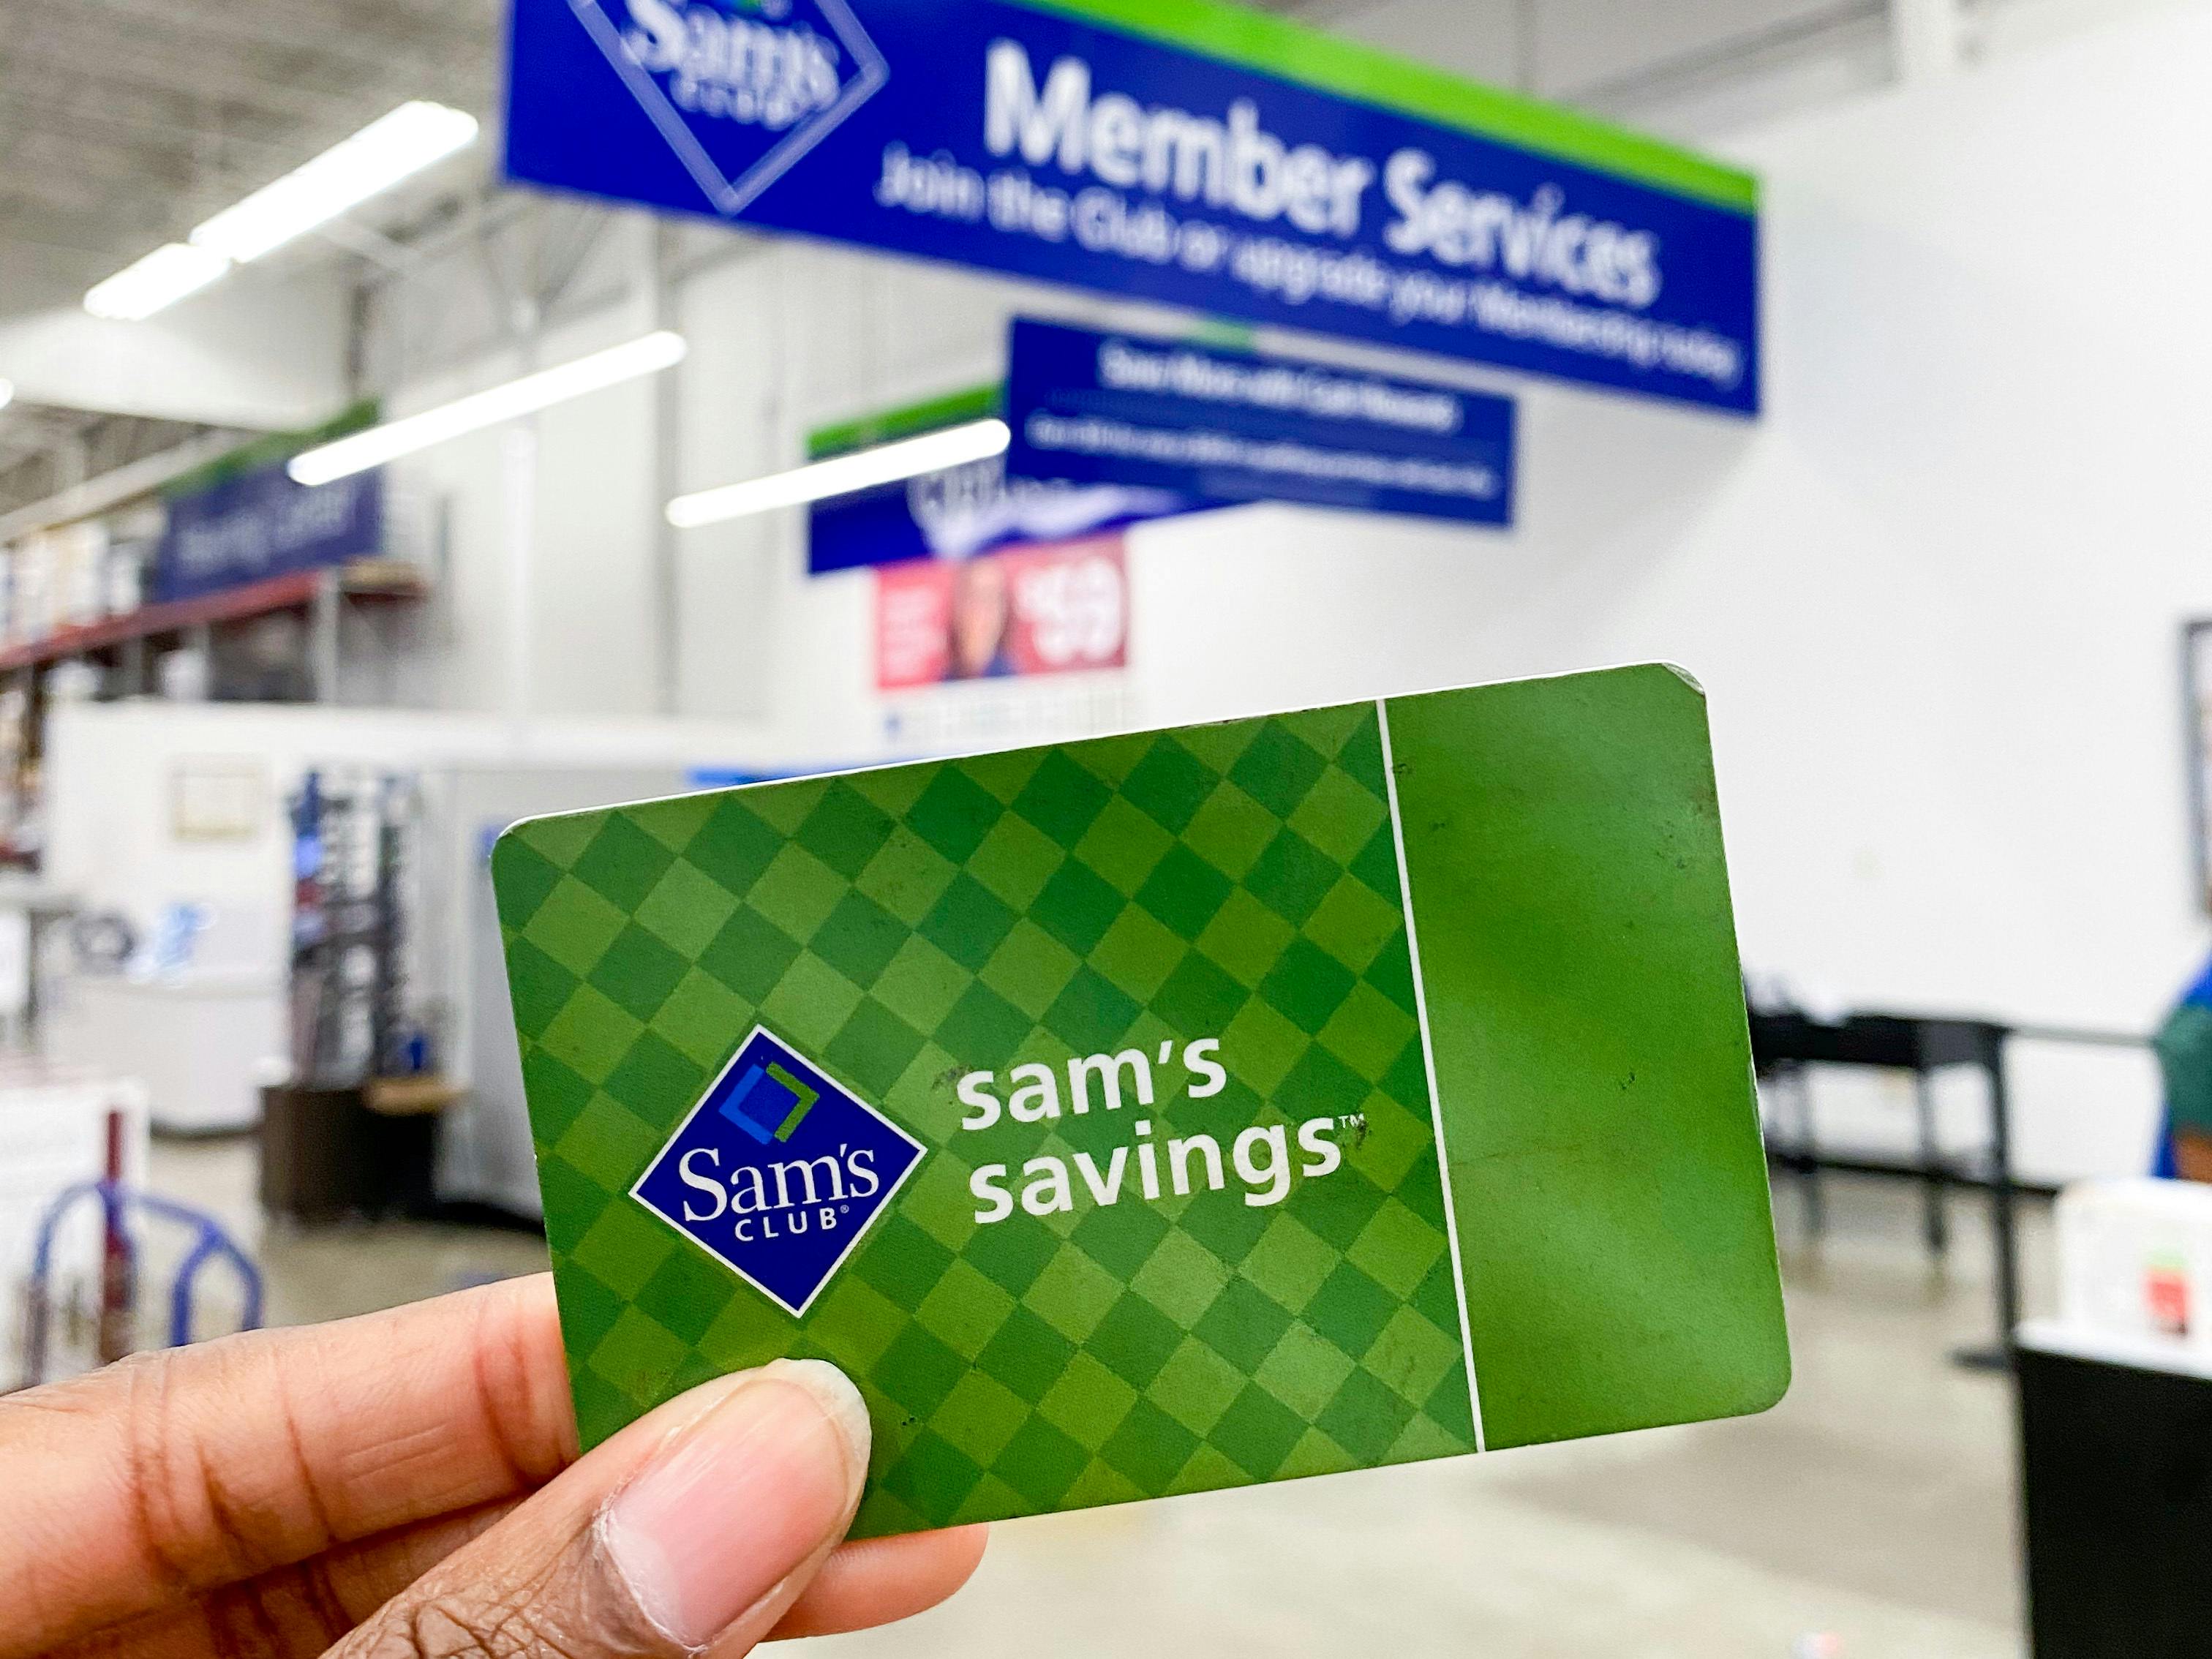 Sam's Club Membership Cost Increase 2022 - The Krazy Coupon Lady